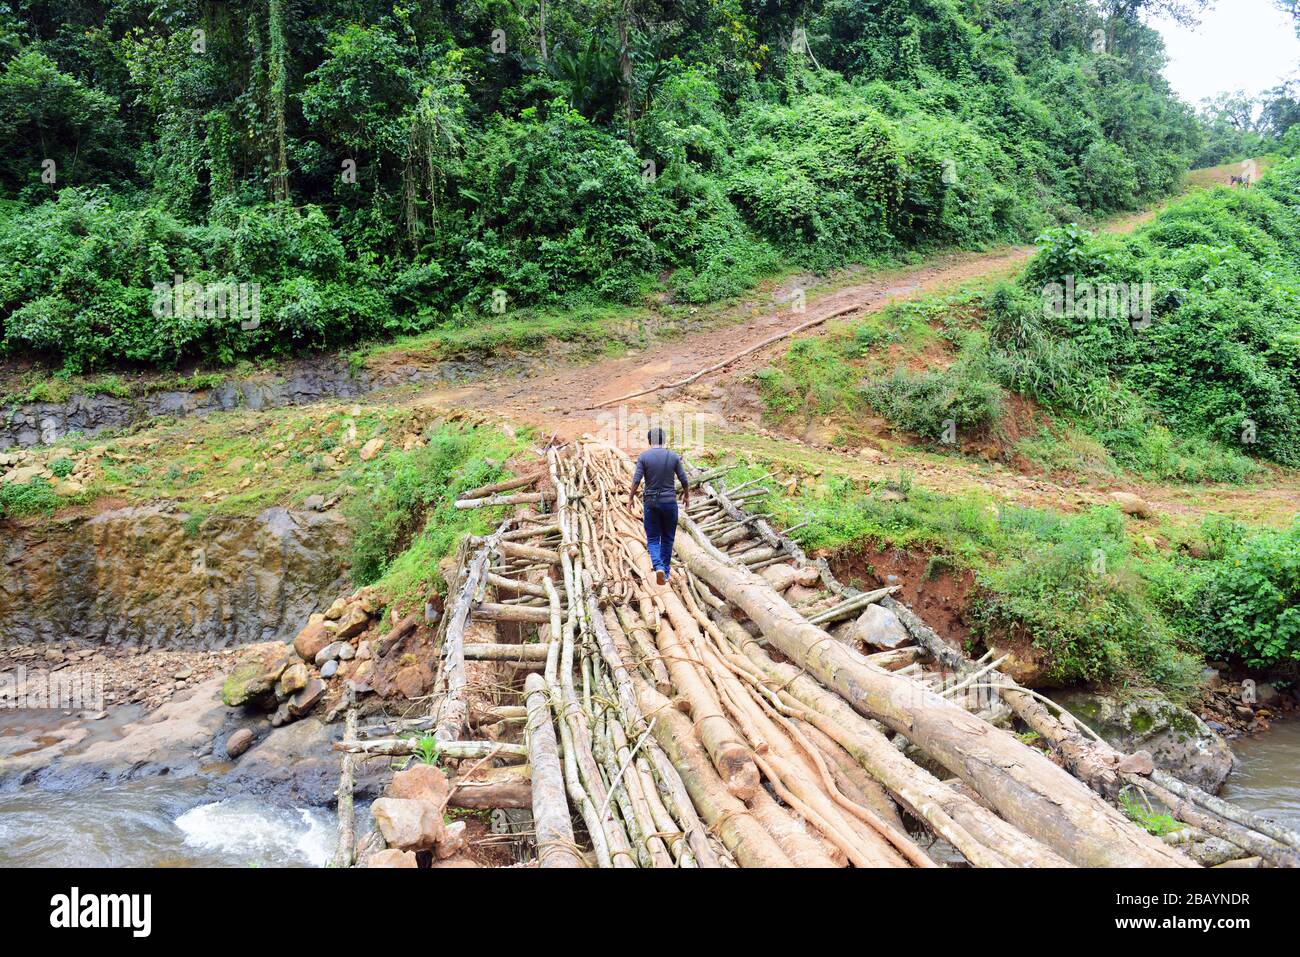 Crossing the wooden bridge in the Mankira wild coffee forest in the Kaffa region of Ethiopia. Stock Photo